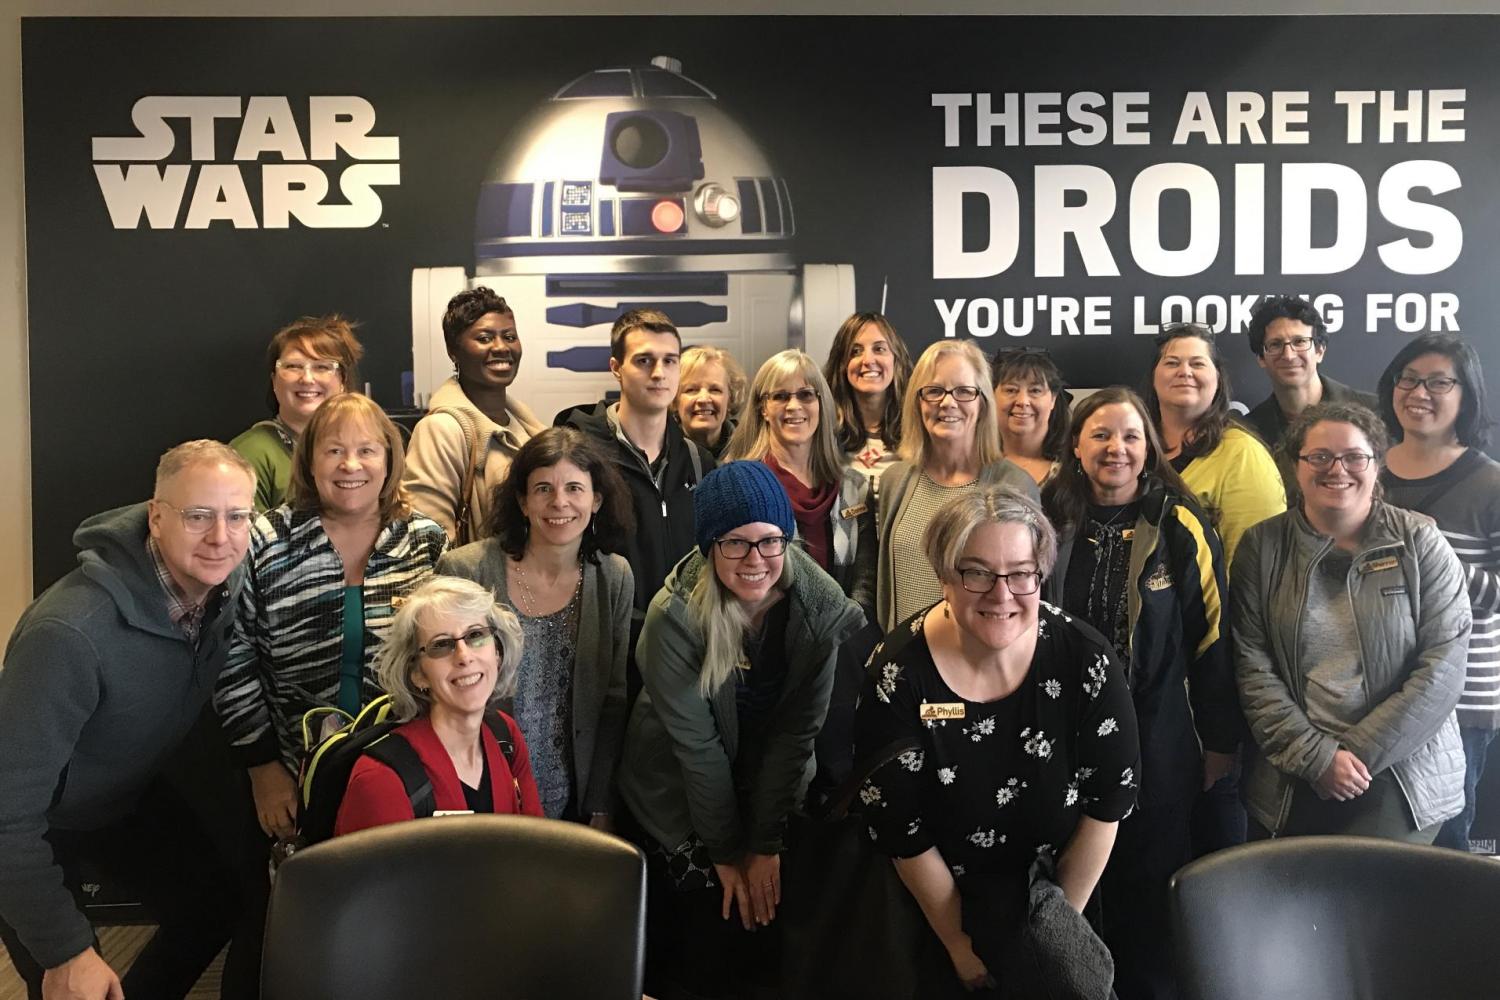 Workshop attendees posing in front of a Star Wars poster